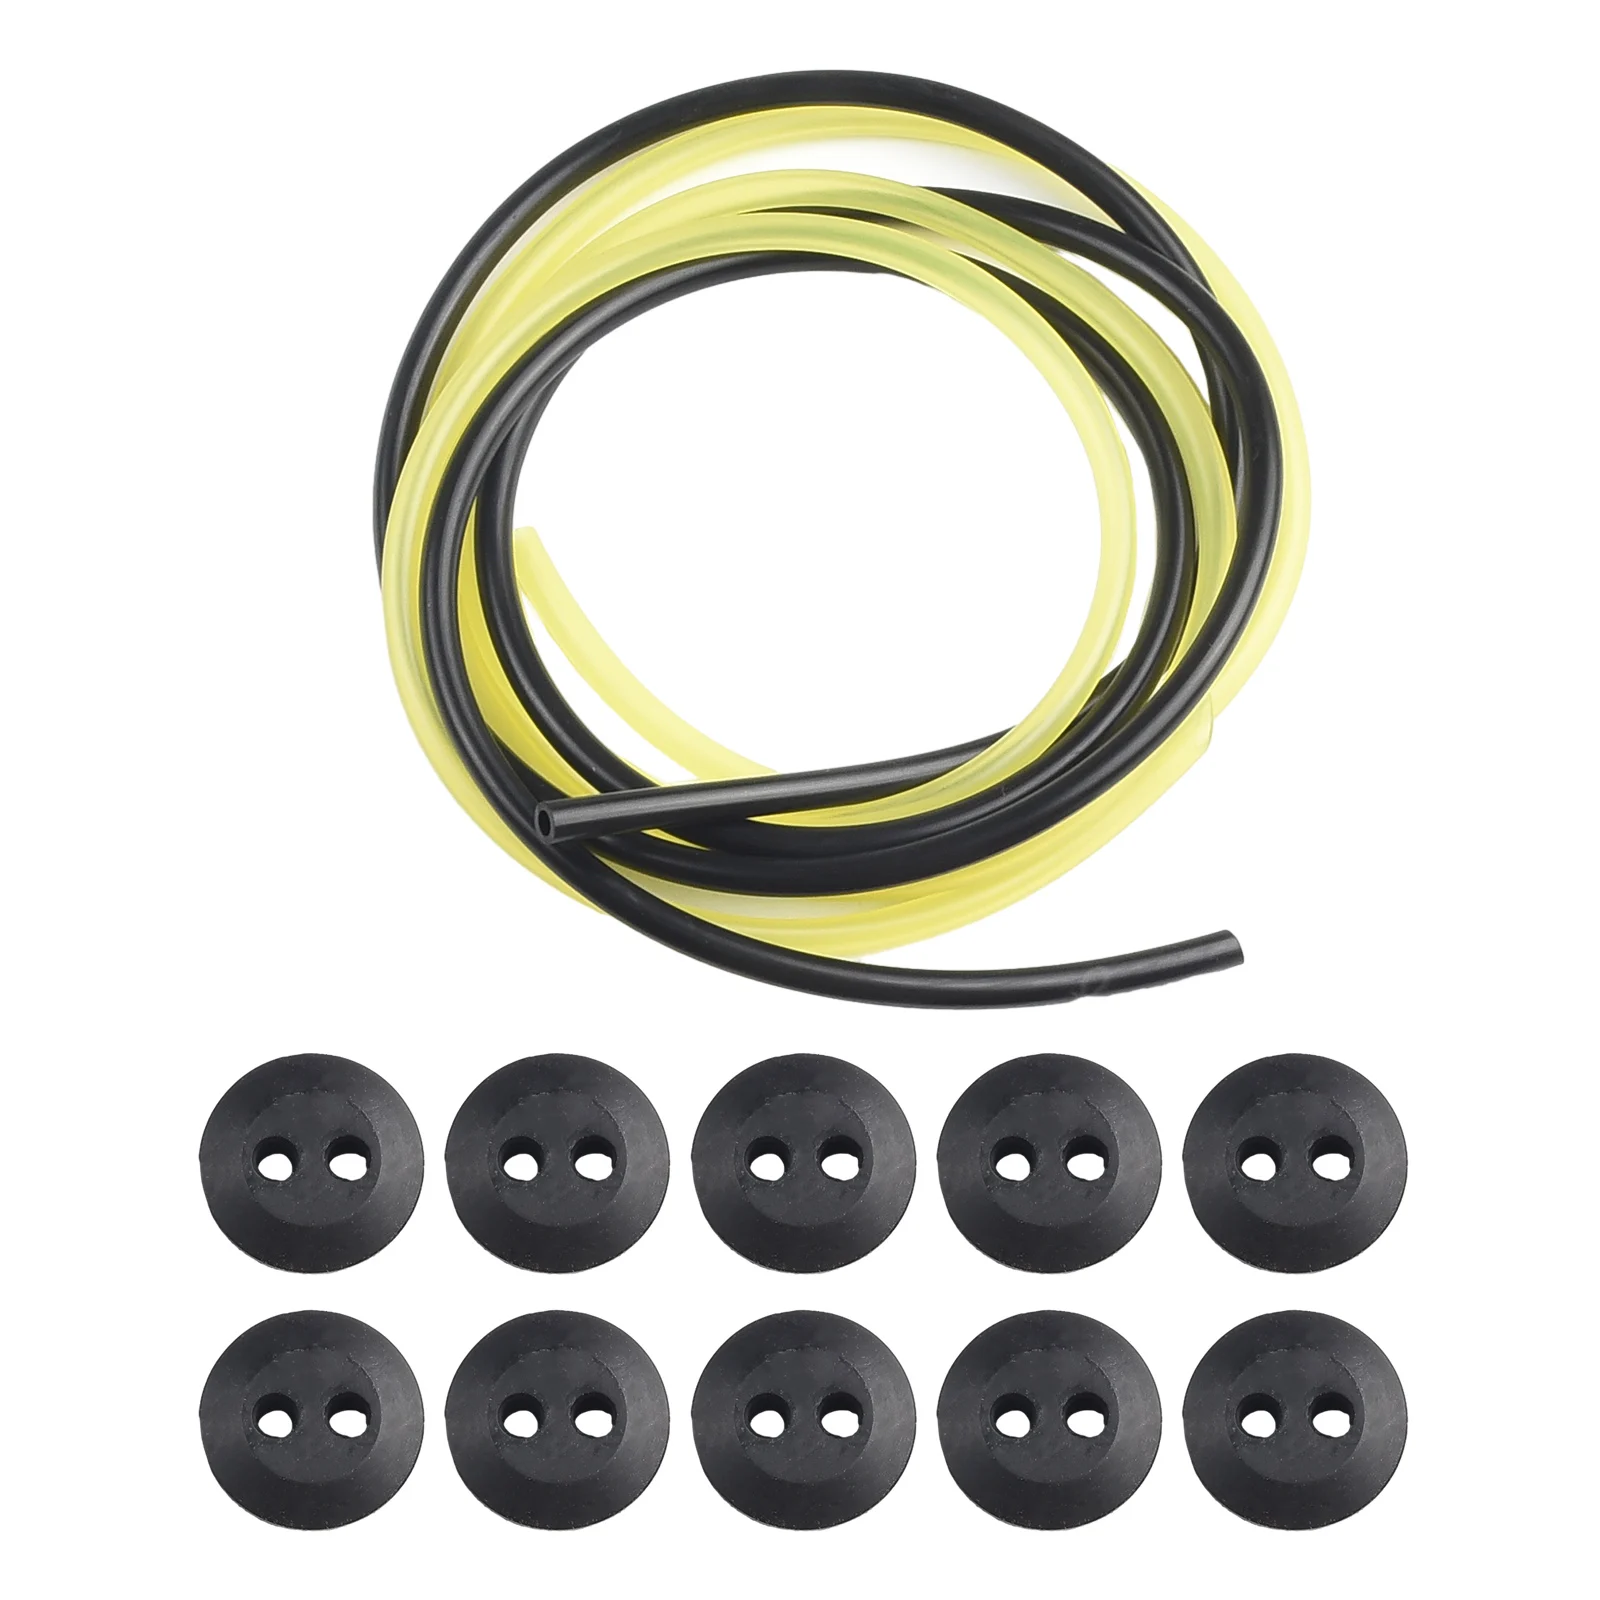 

Lawn Mower Accessories Kit 12pcs 2 Holes Fuel Tank Grommet Rubber With Fuel Line Pipe For Brush Cutter Garden Tools Accessories